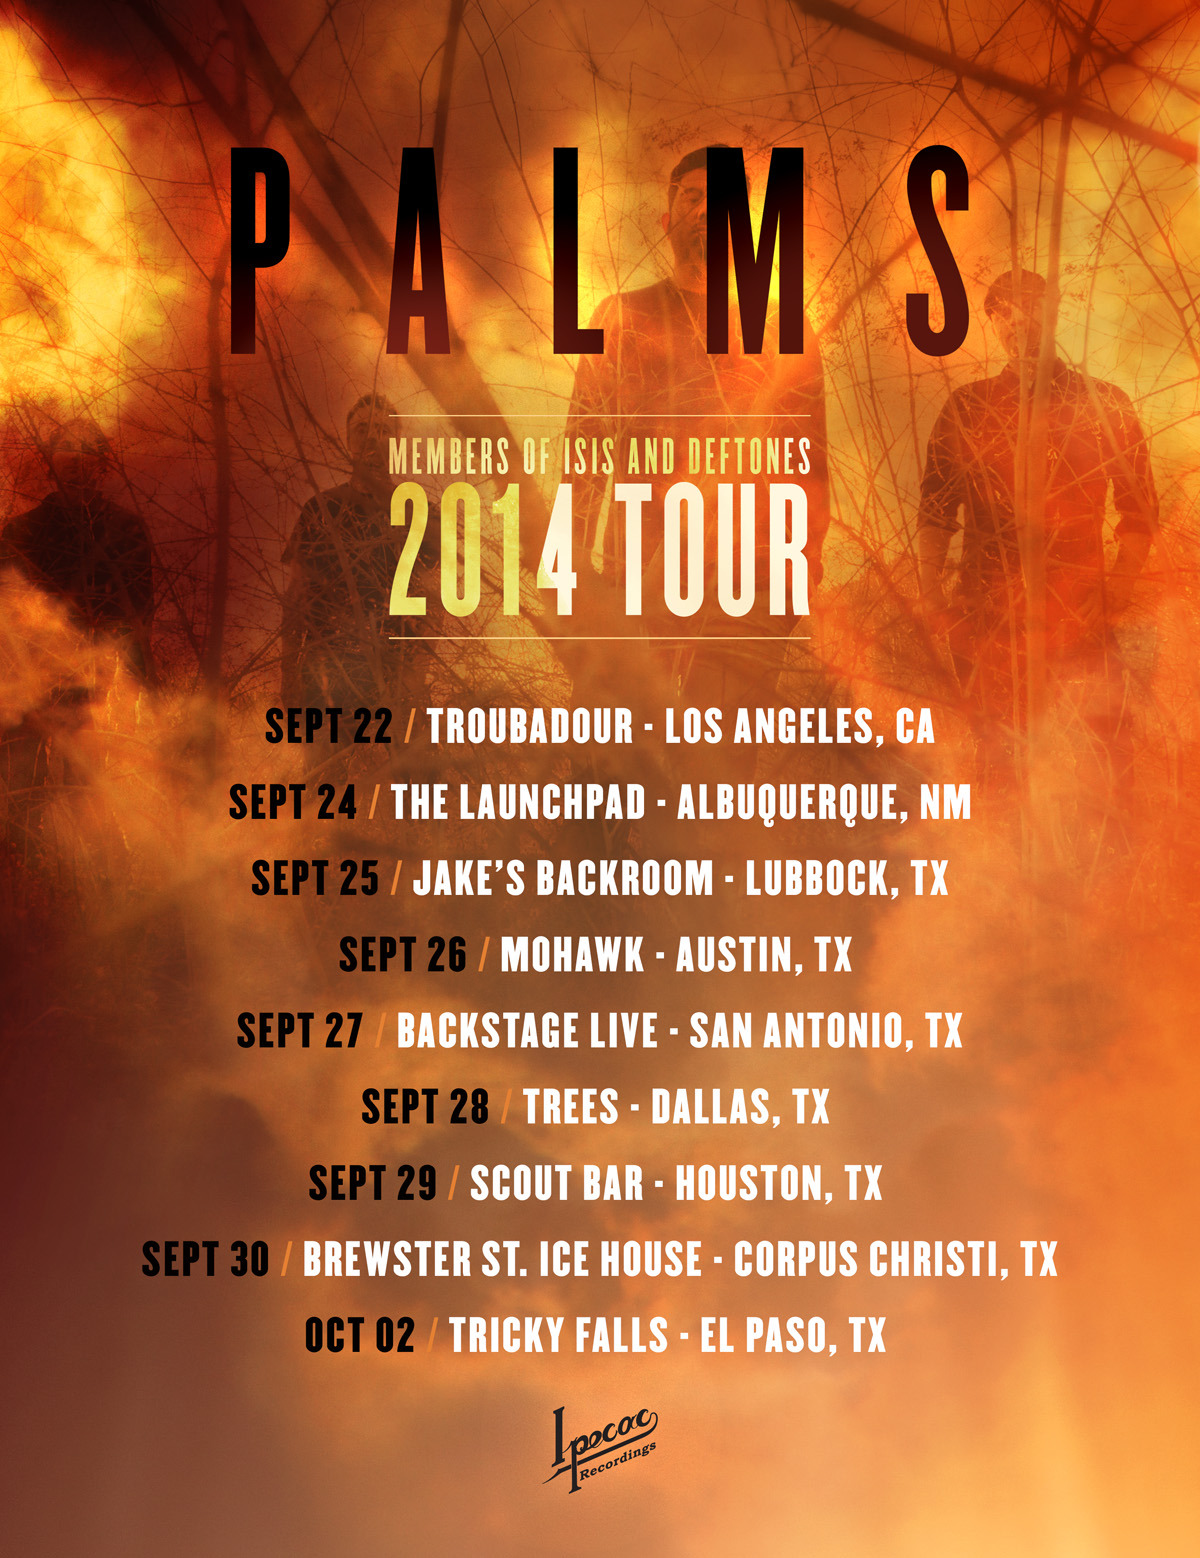 Tickets for our September tour are now on sale. Find info and links to buy tickets here: https://www.facebook.com/palmsband/events